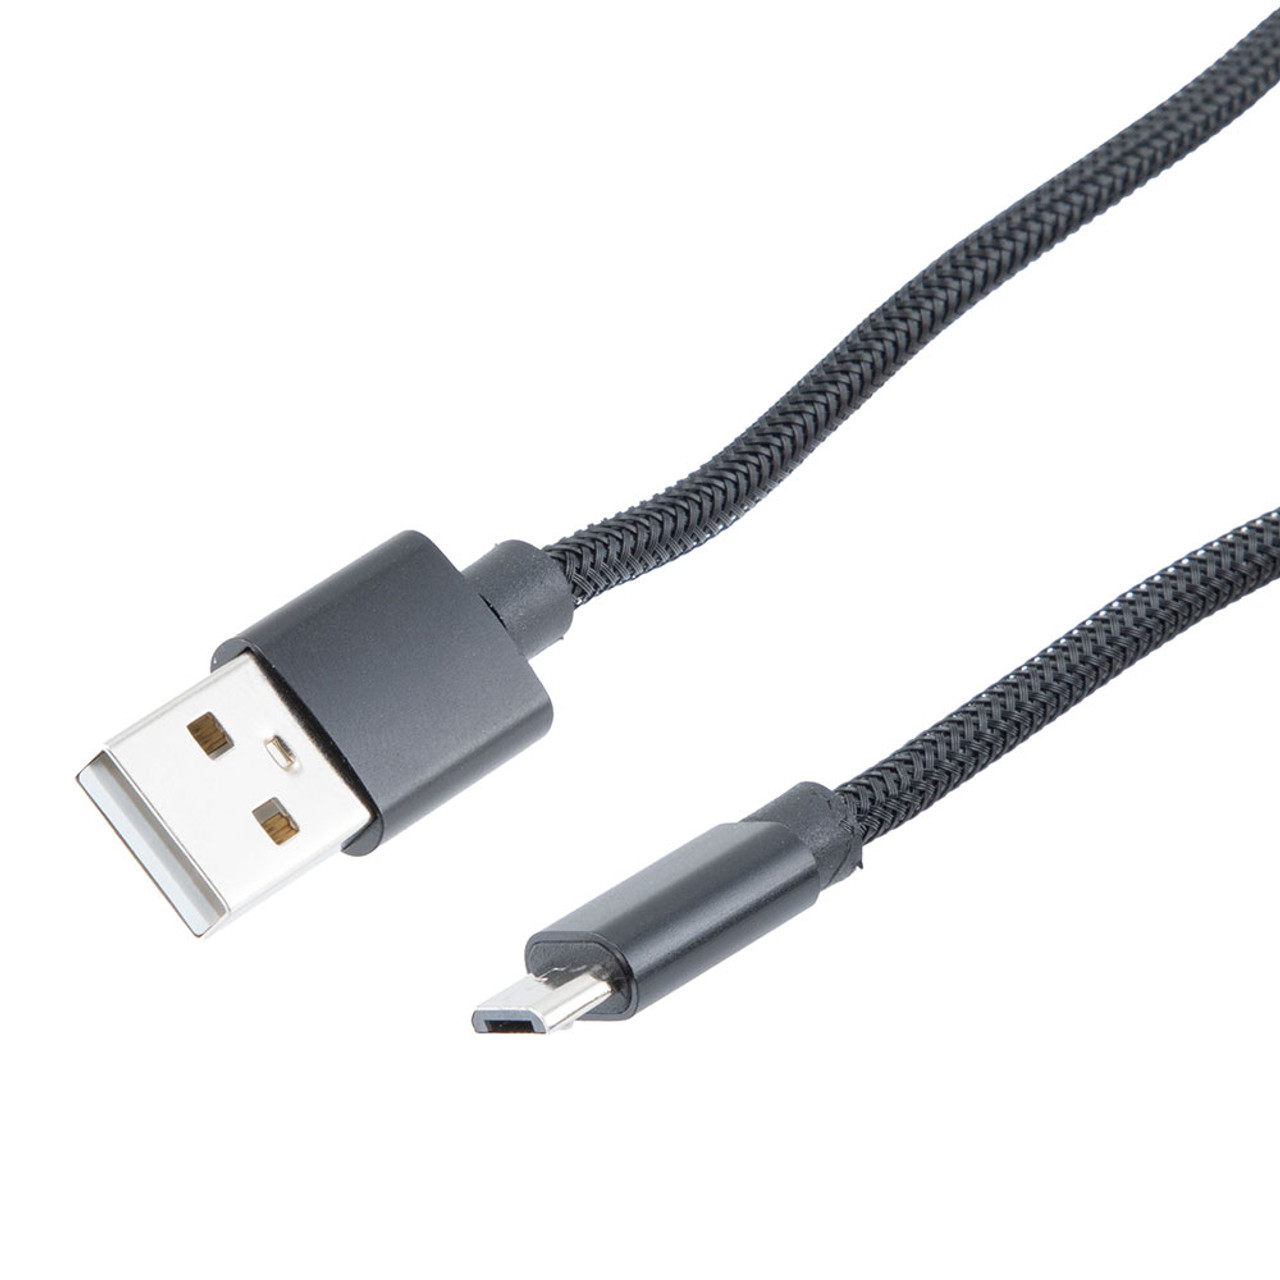 USB 2.0 type A Male to micro Male - 3, 6, and 10 feet